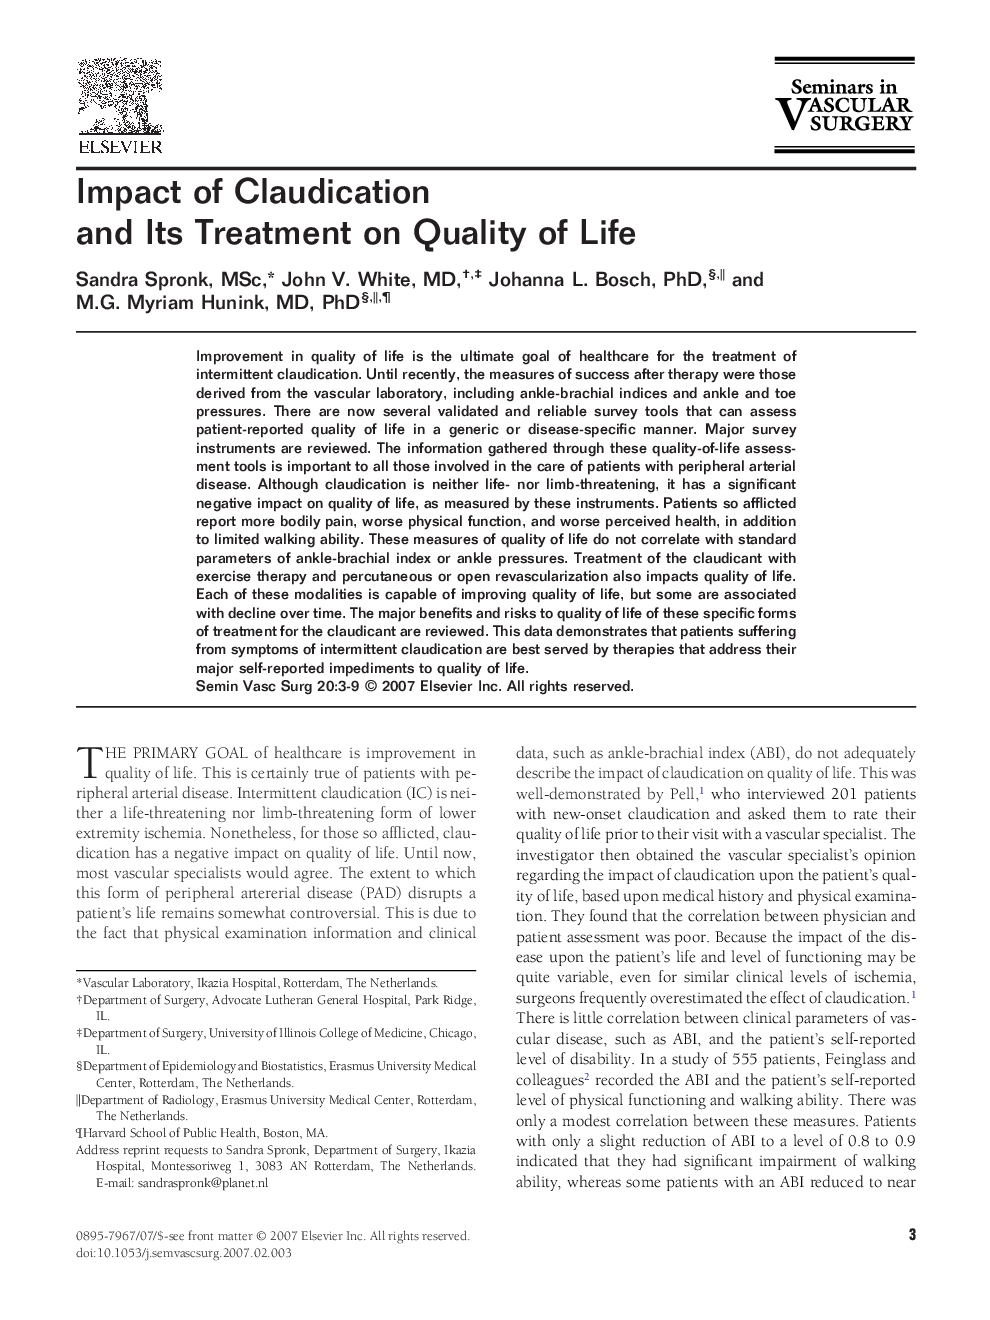 Impact of Claudication and Its Treatment on Quality of Life